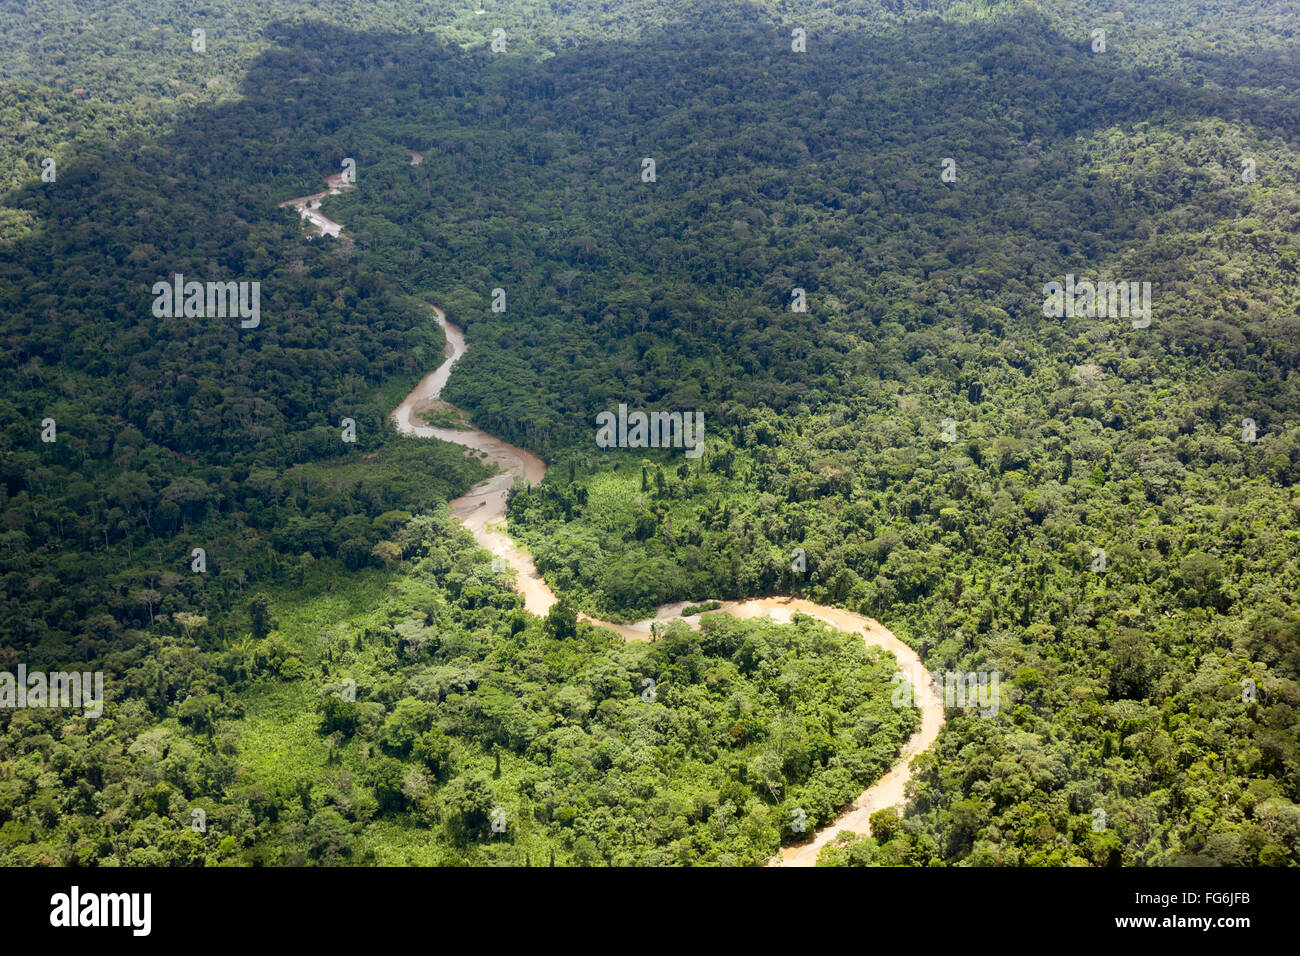 Aerial view of a river running through lowland Amazonian rainforest in Pastaza Province, Ecuador Stock Photo